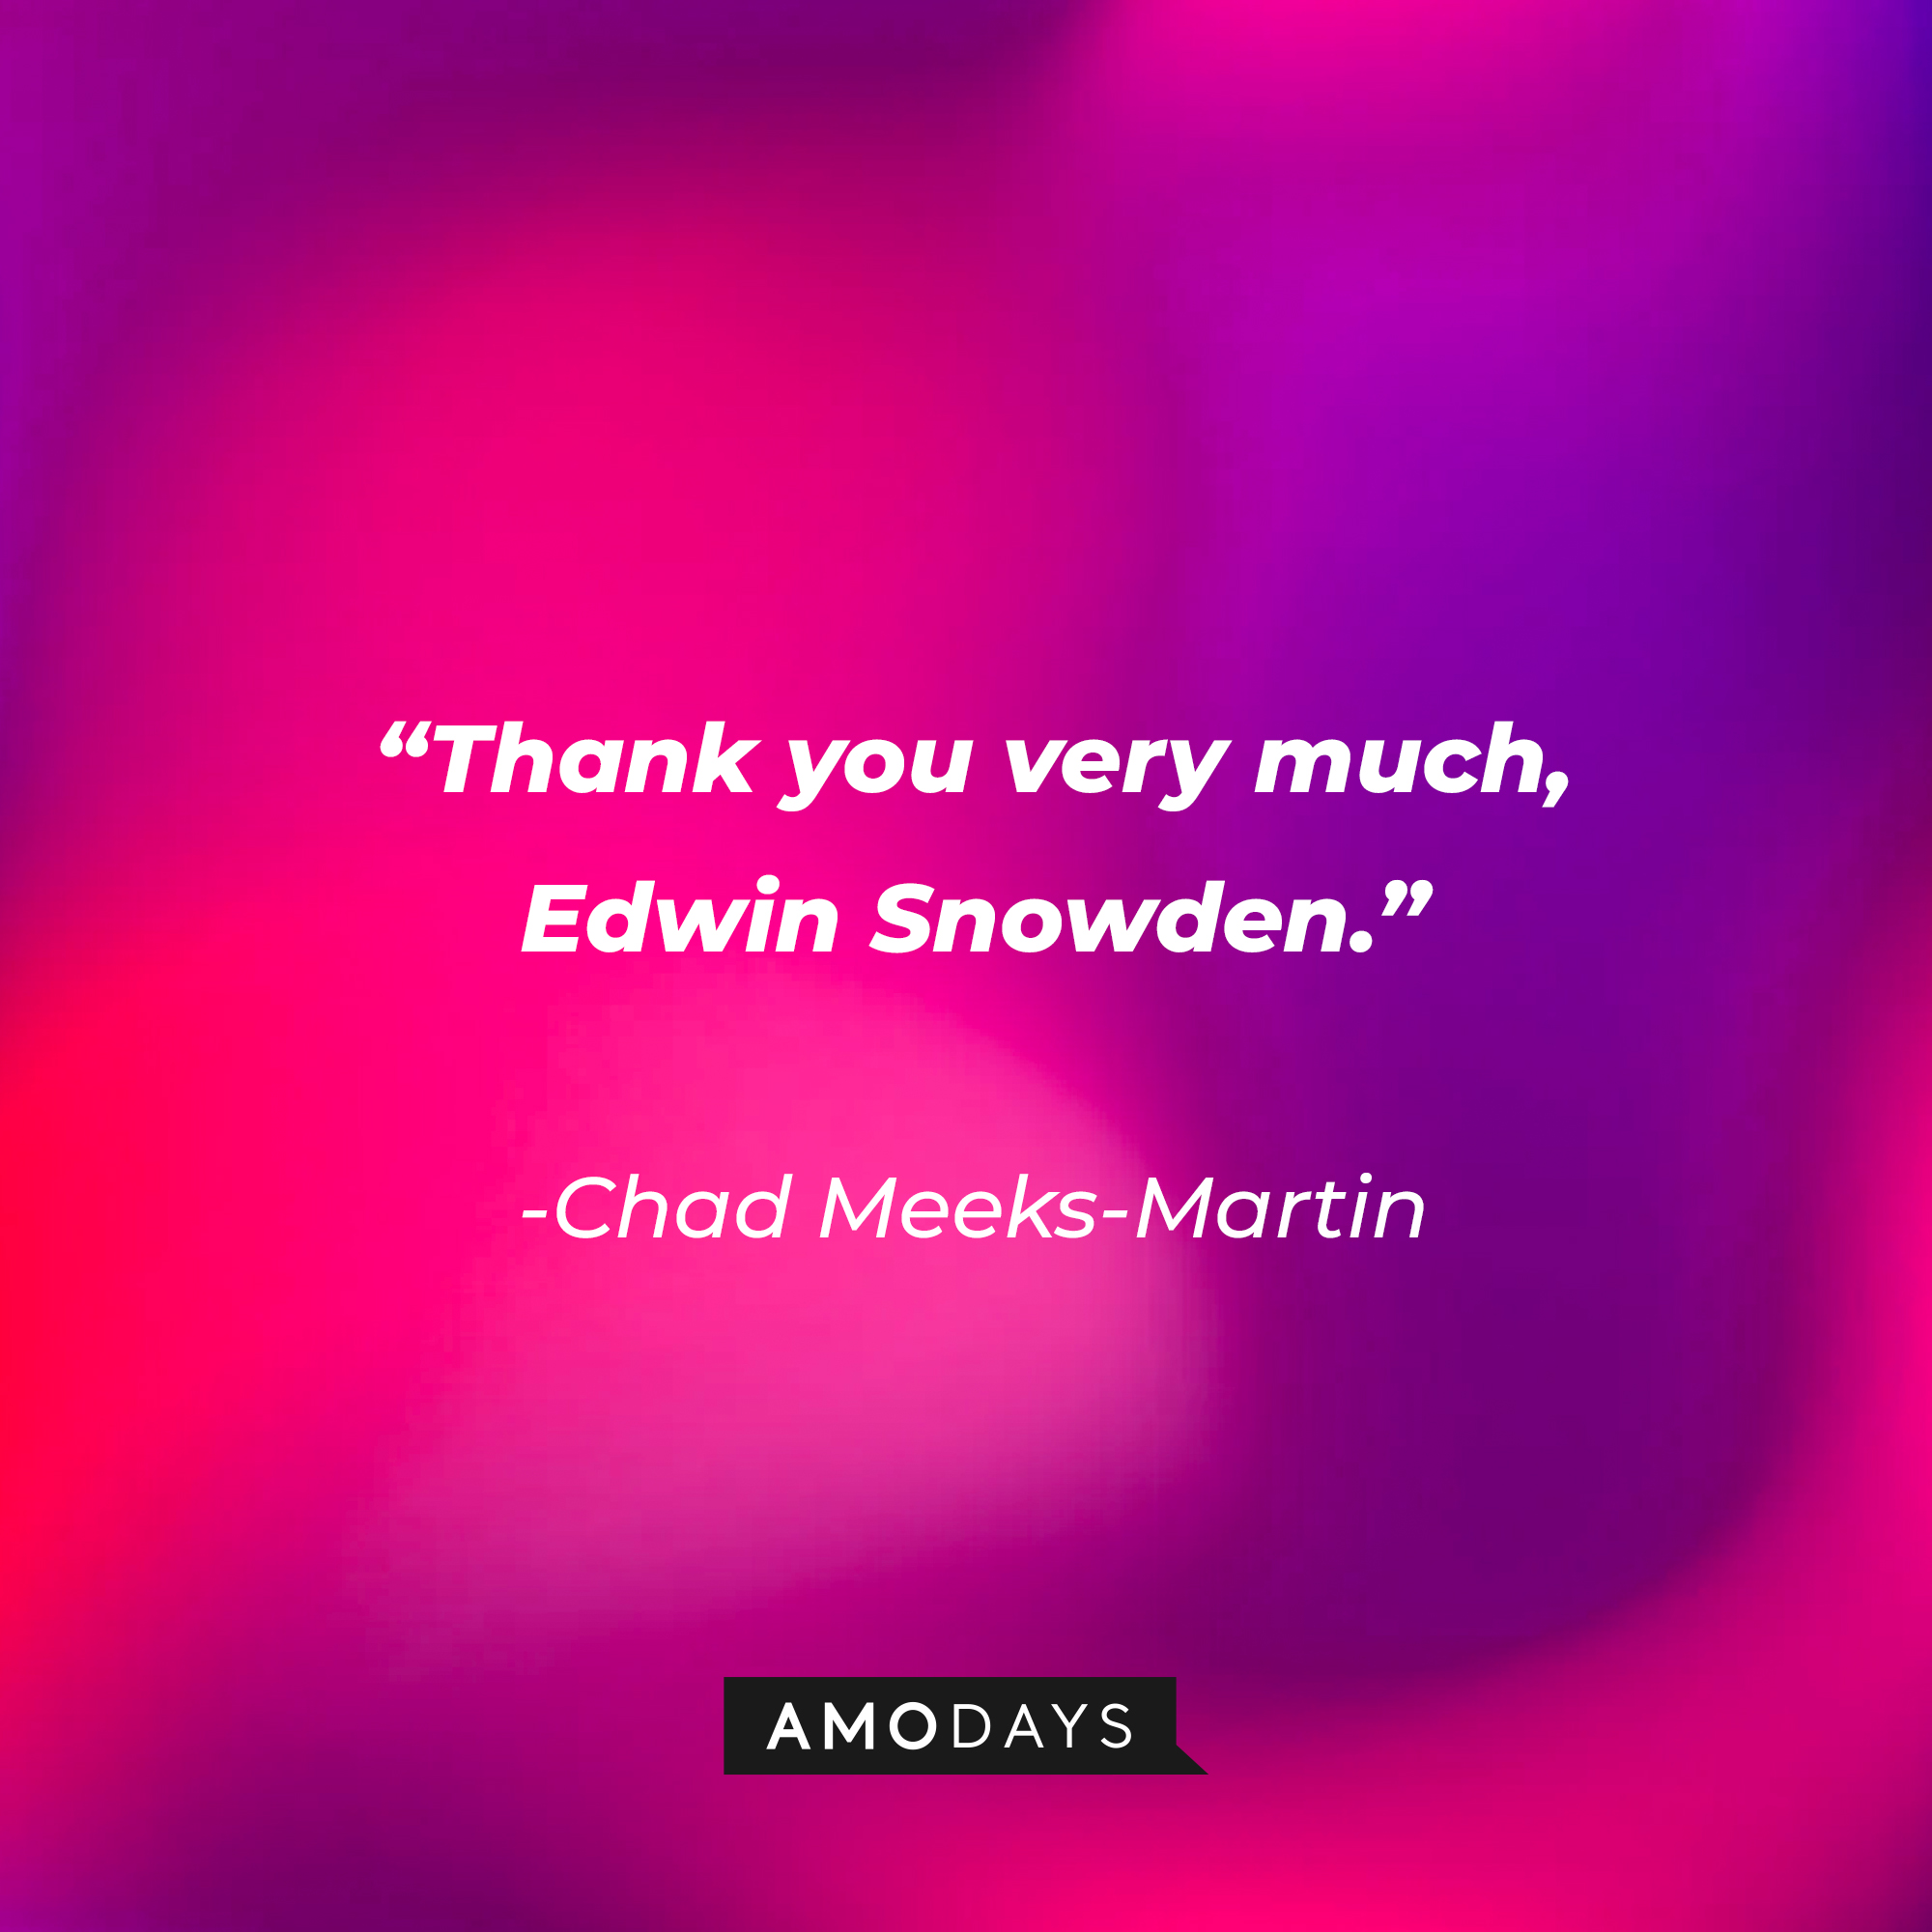 Chad Meeks-Martin’s quote from “Scream ‘(2020)’”: “Thank you very much, Edwin Snowden.” | Source: AmoDays